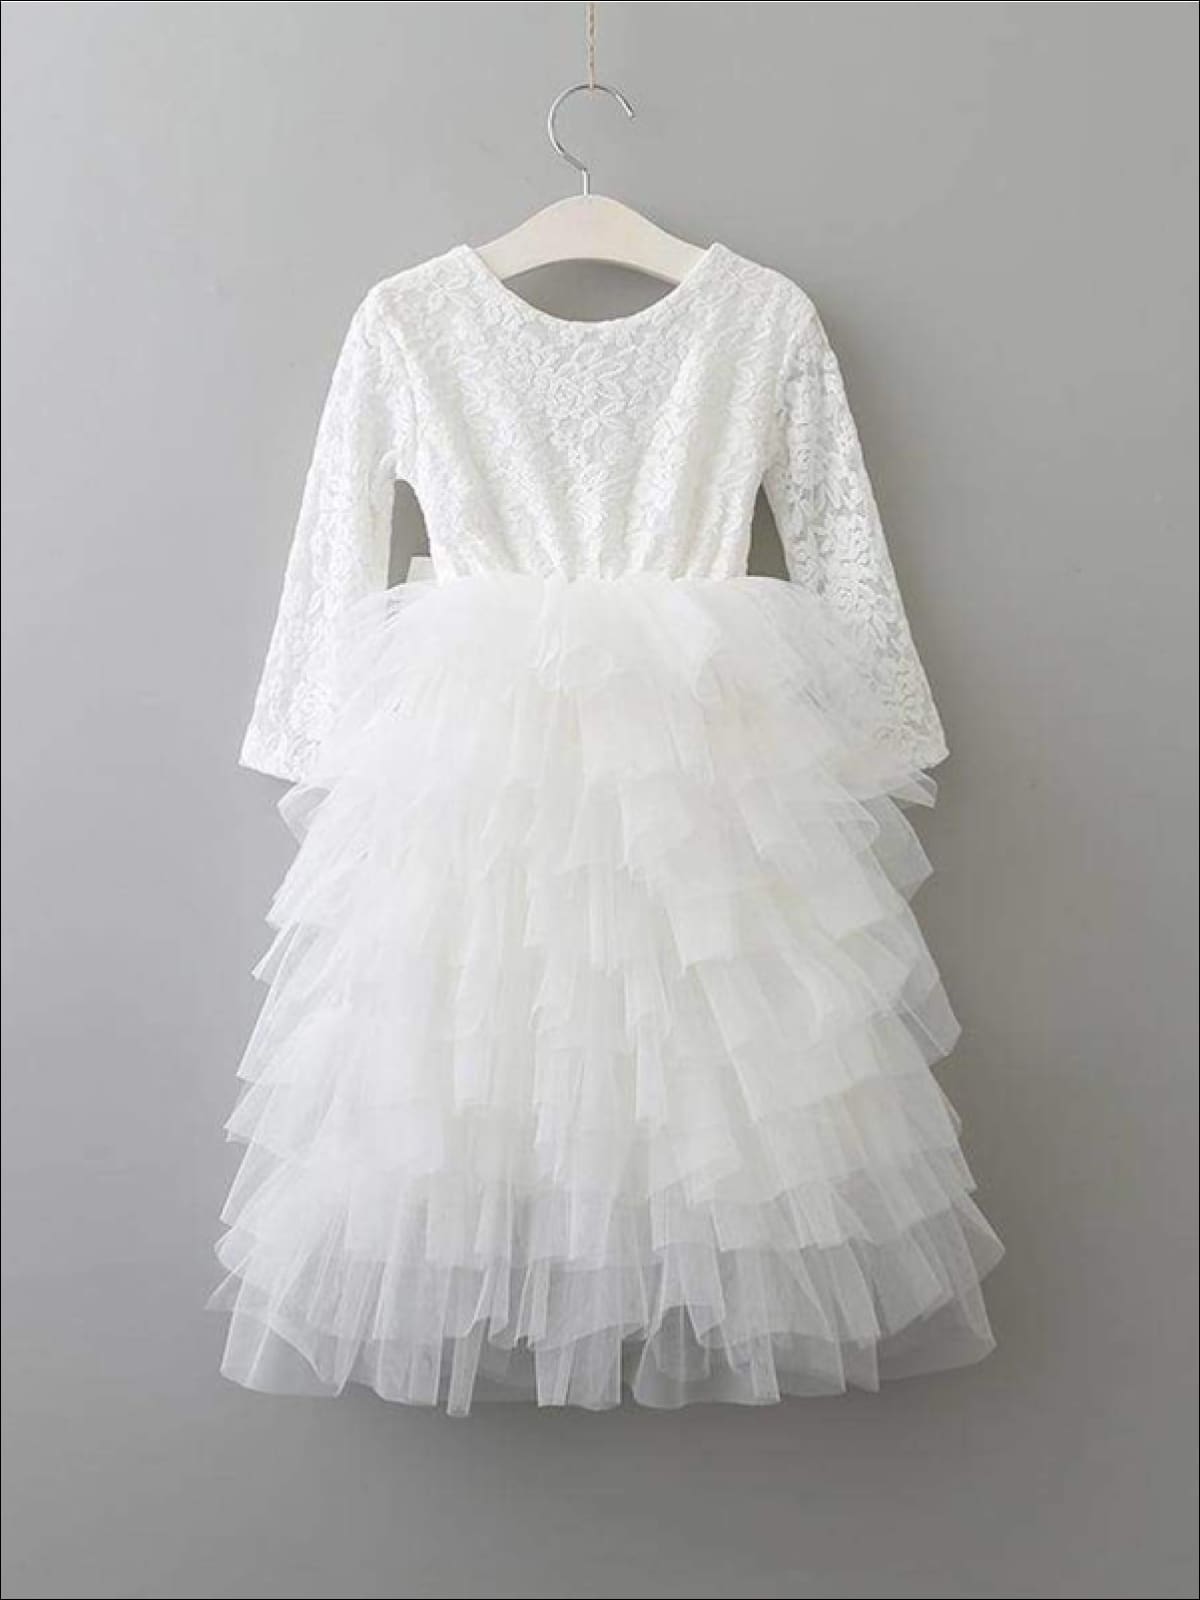 Girls Communion Dresses | White Maxi Lace Tiered Ruffled Party Dress